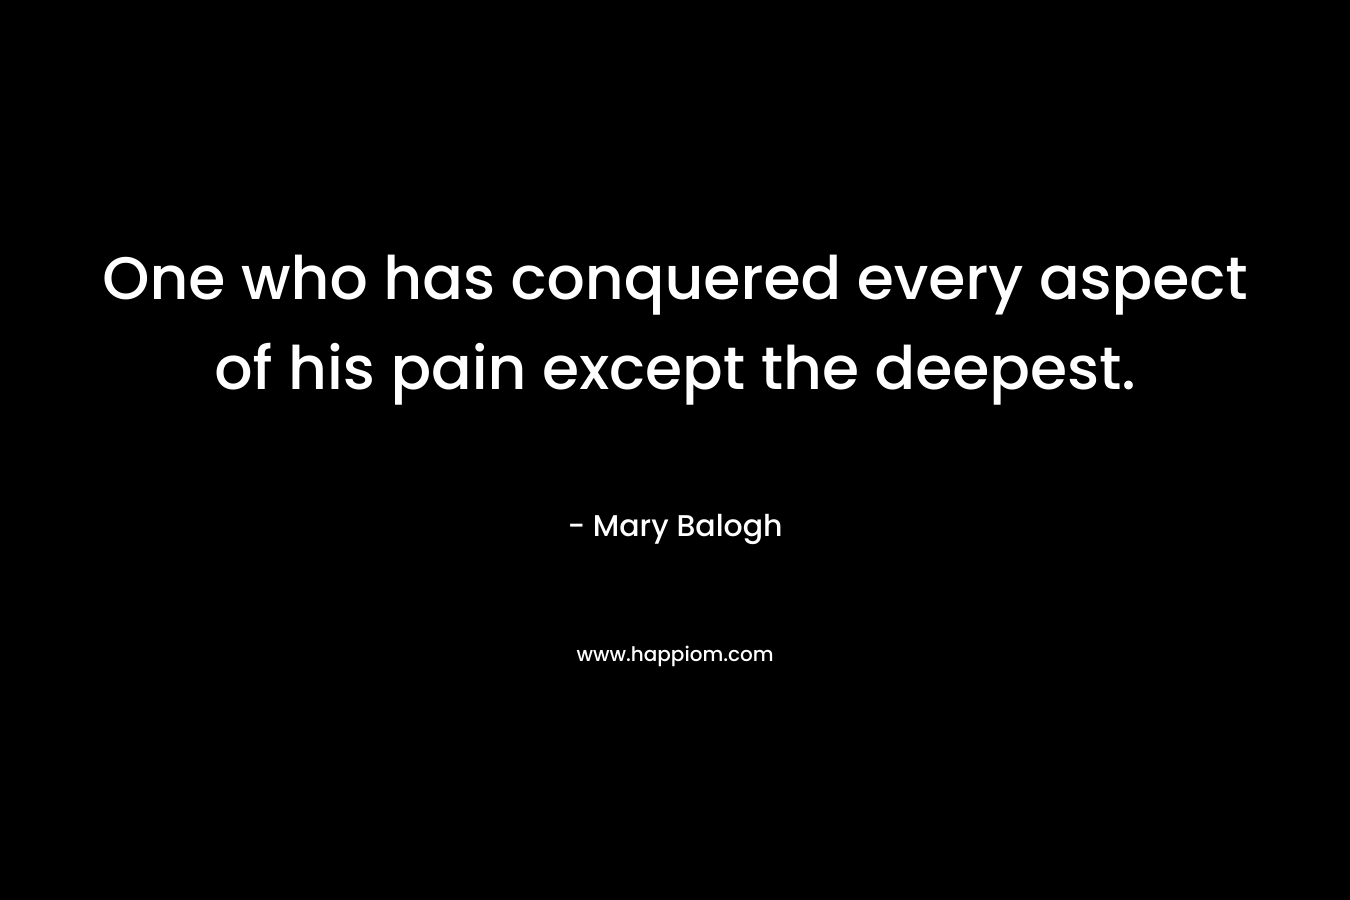 One who has conquered every aspect of his pain except the deepest.